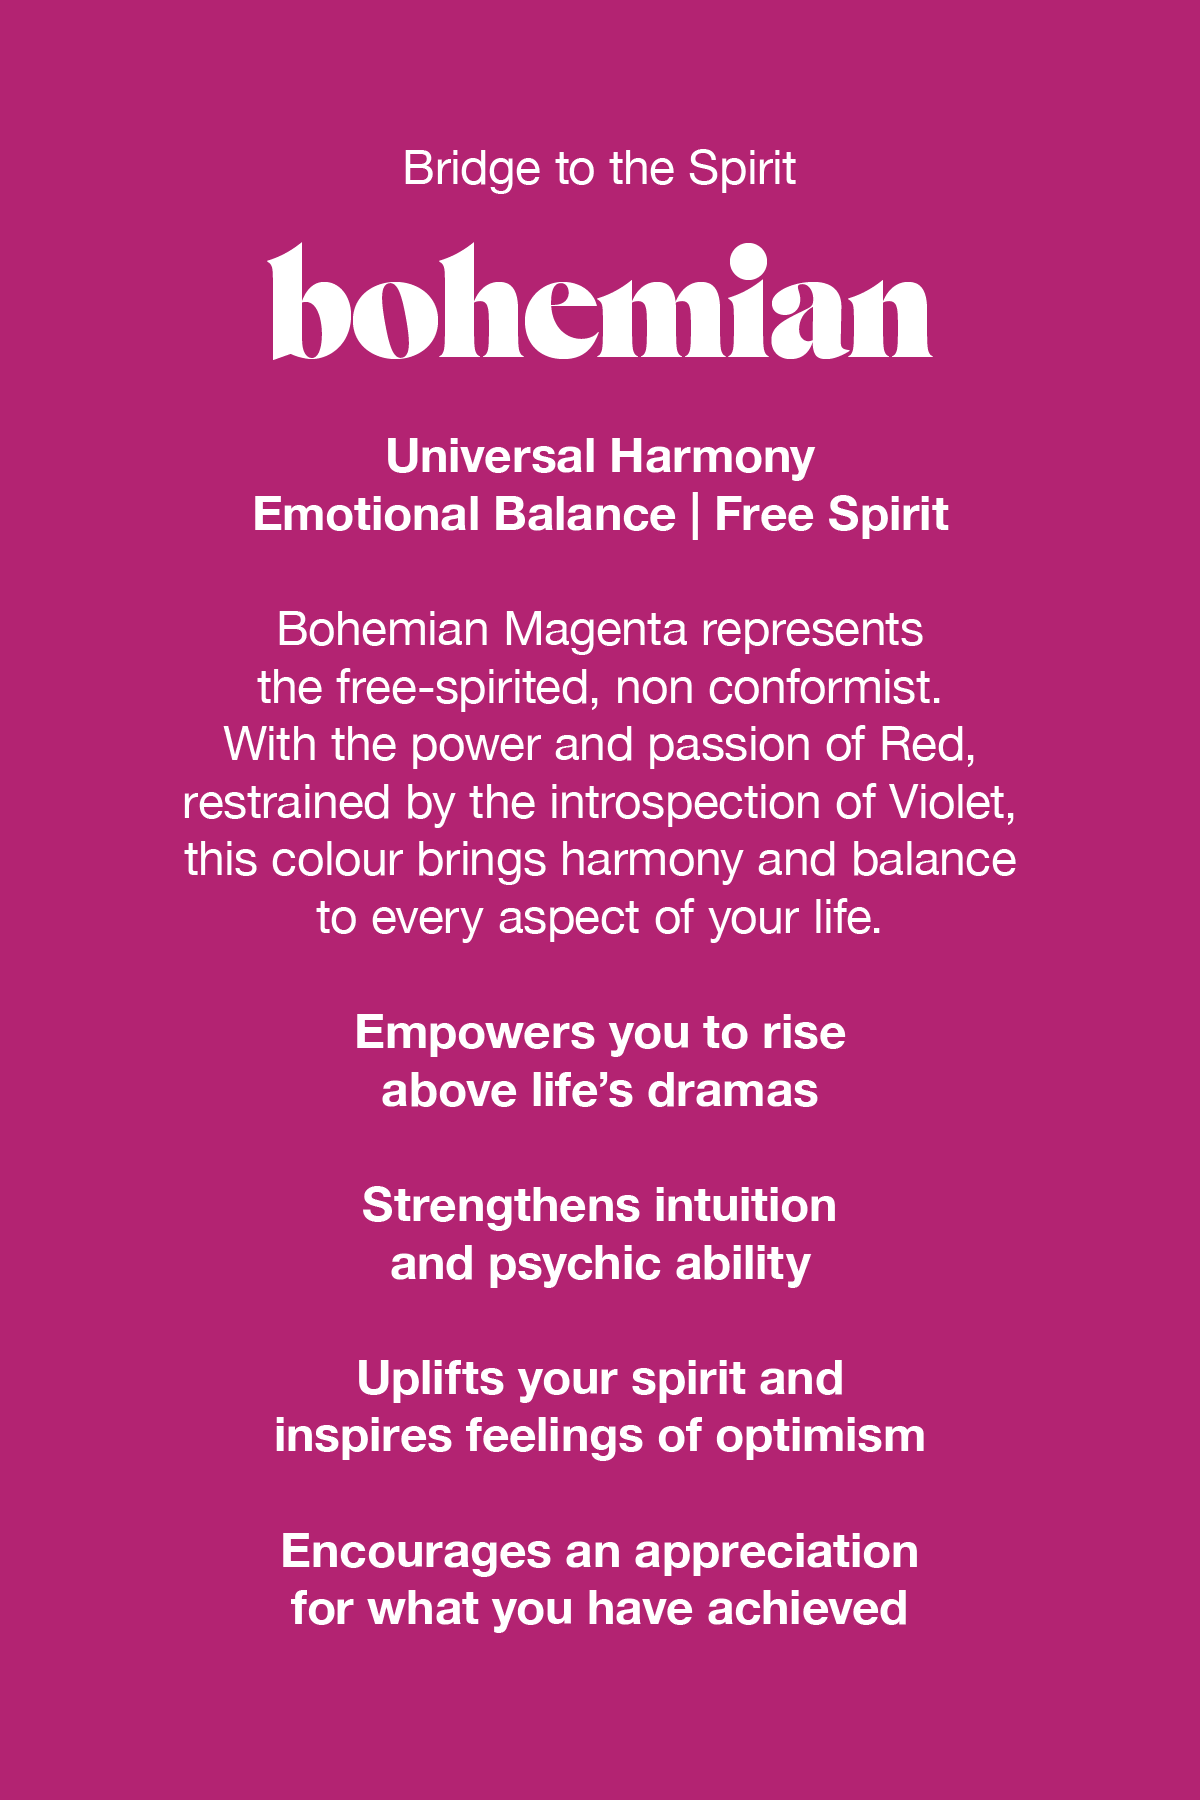 Bohemian Magenta represents the free-spirited non conformist. With the power and passion of red, balanced by the introspection of violet, this colour brings harmony and balance to every aspect of your life.